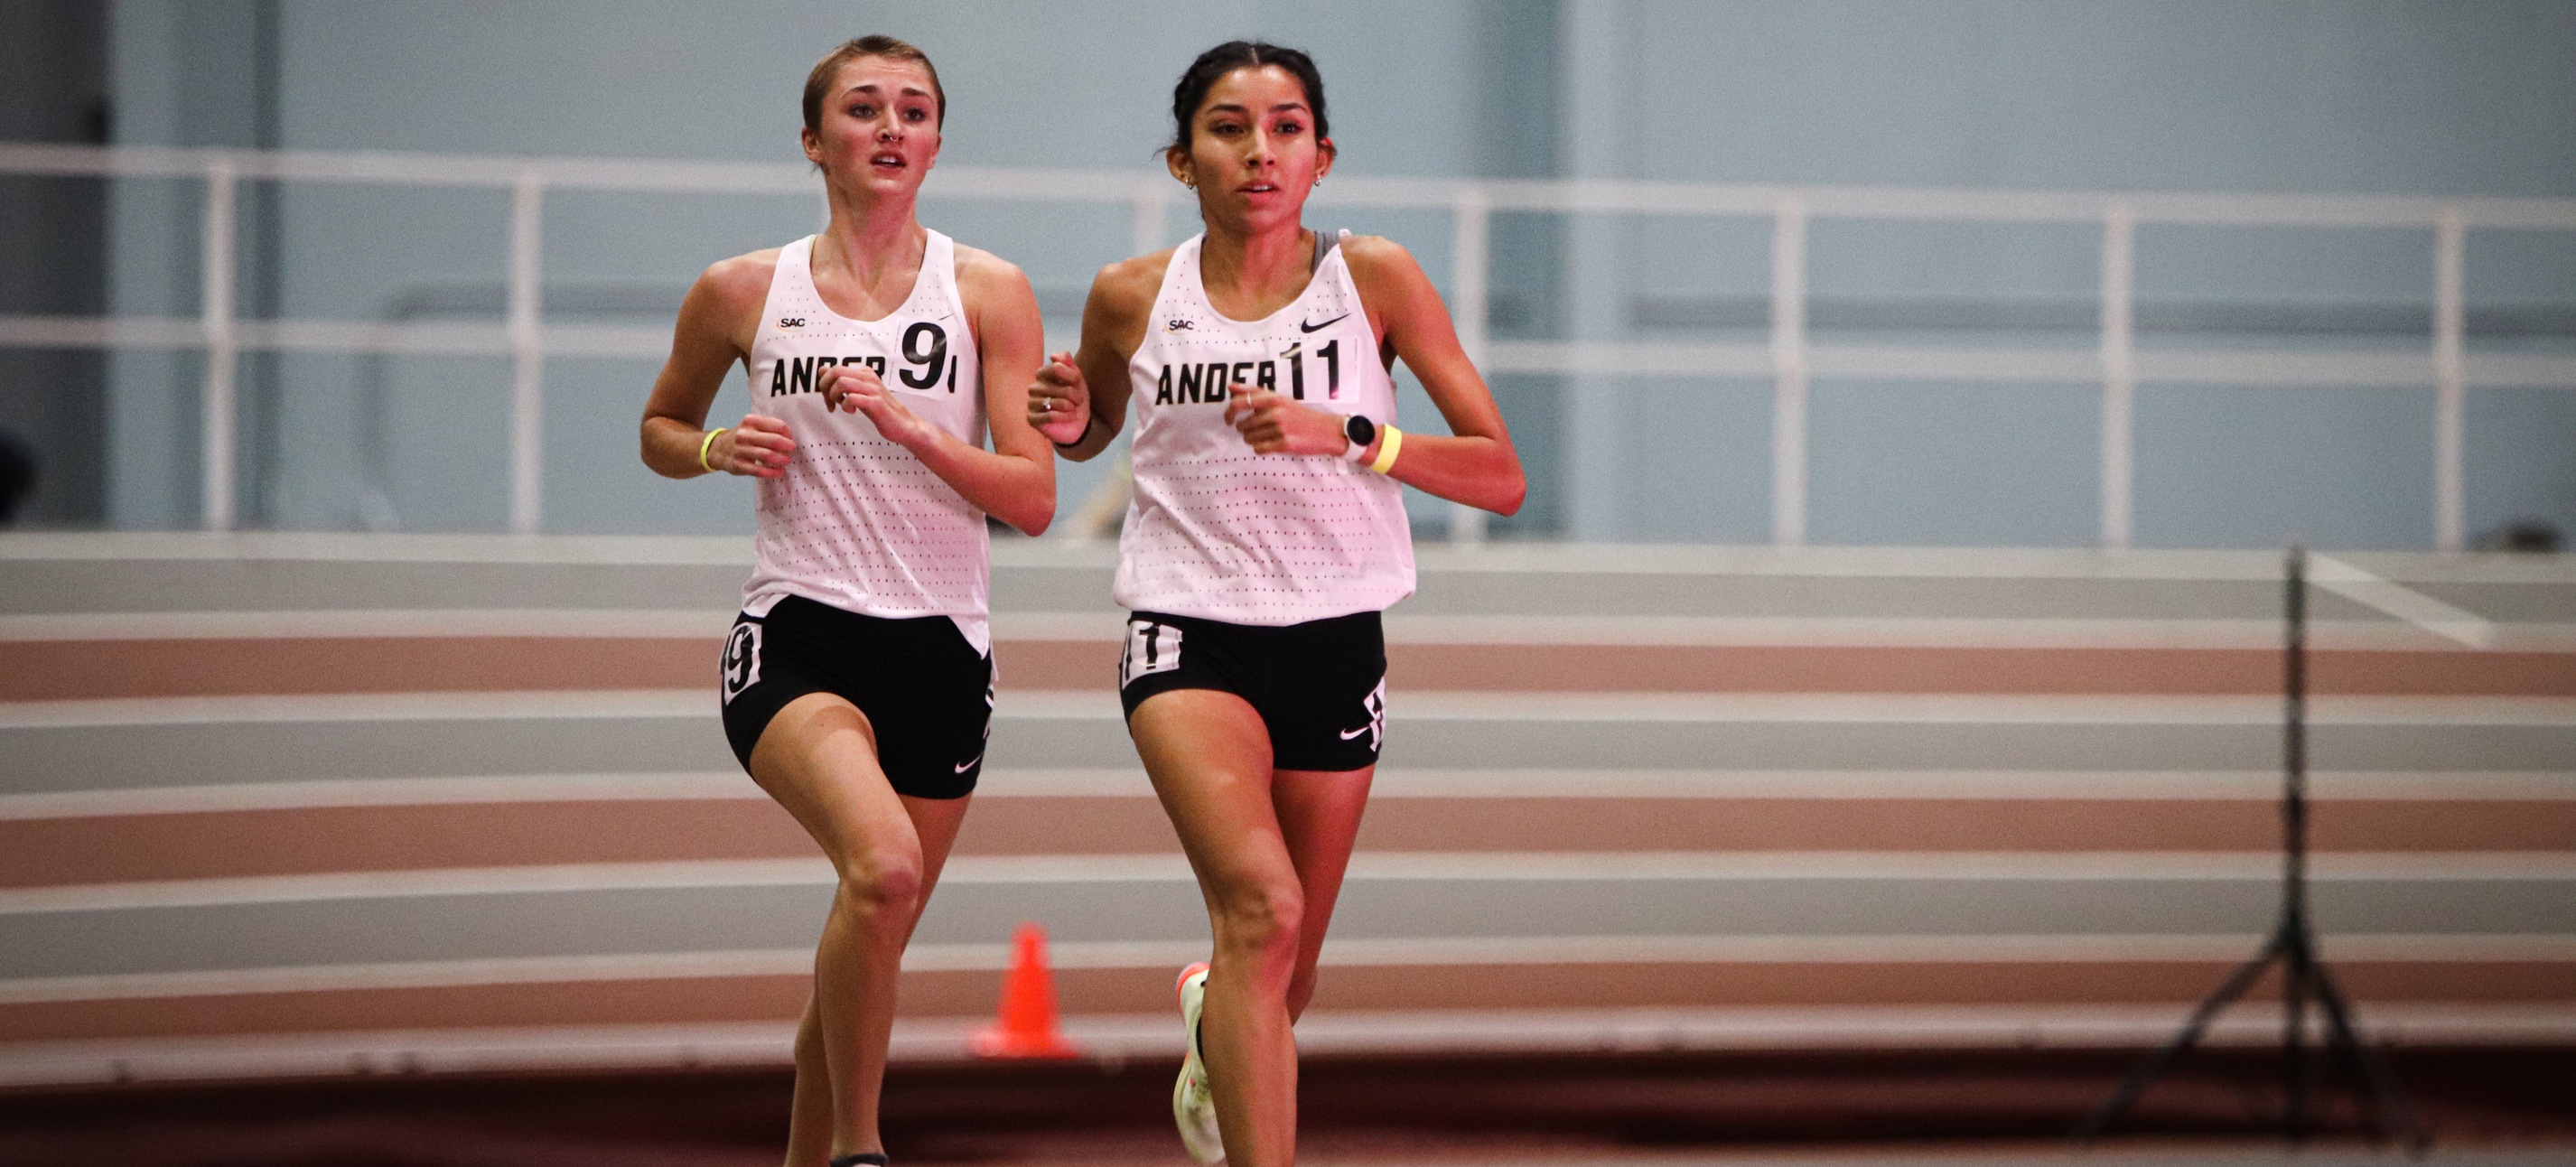 Women's Track and Field Impresses in Two Saturday Meets